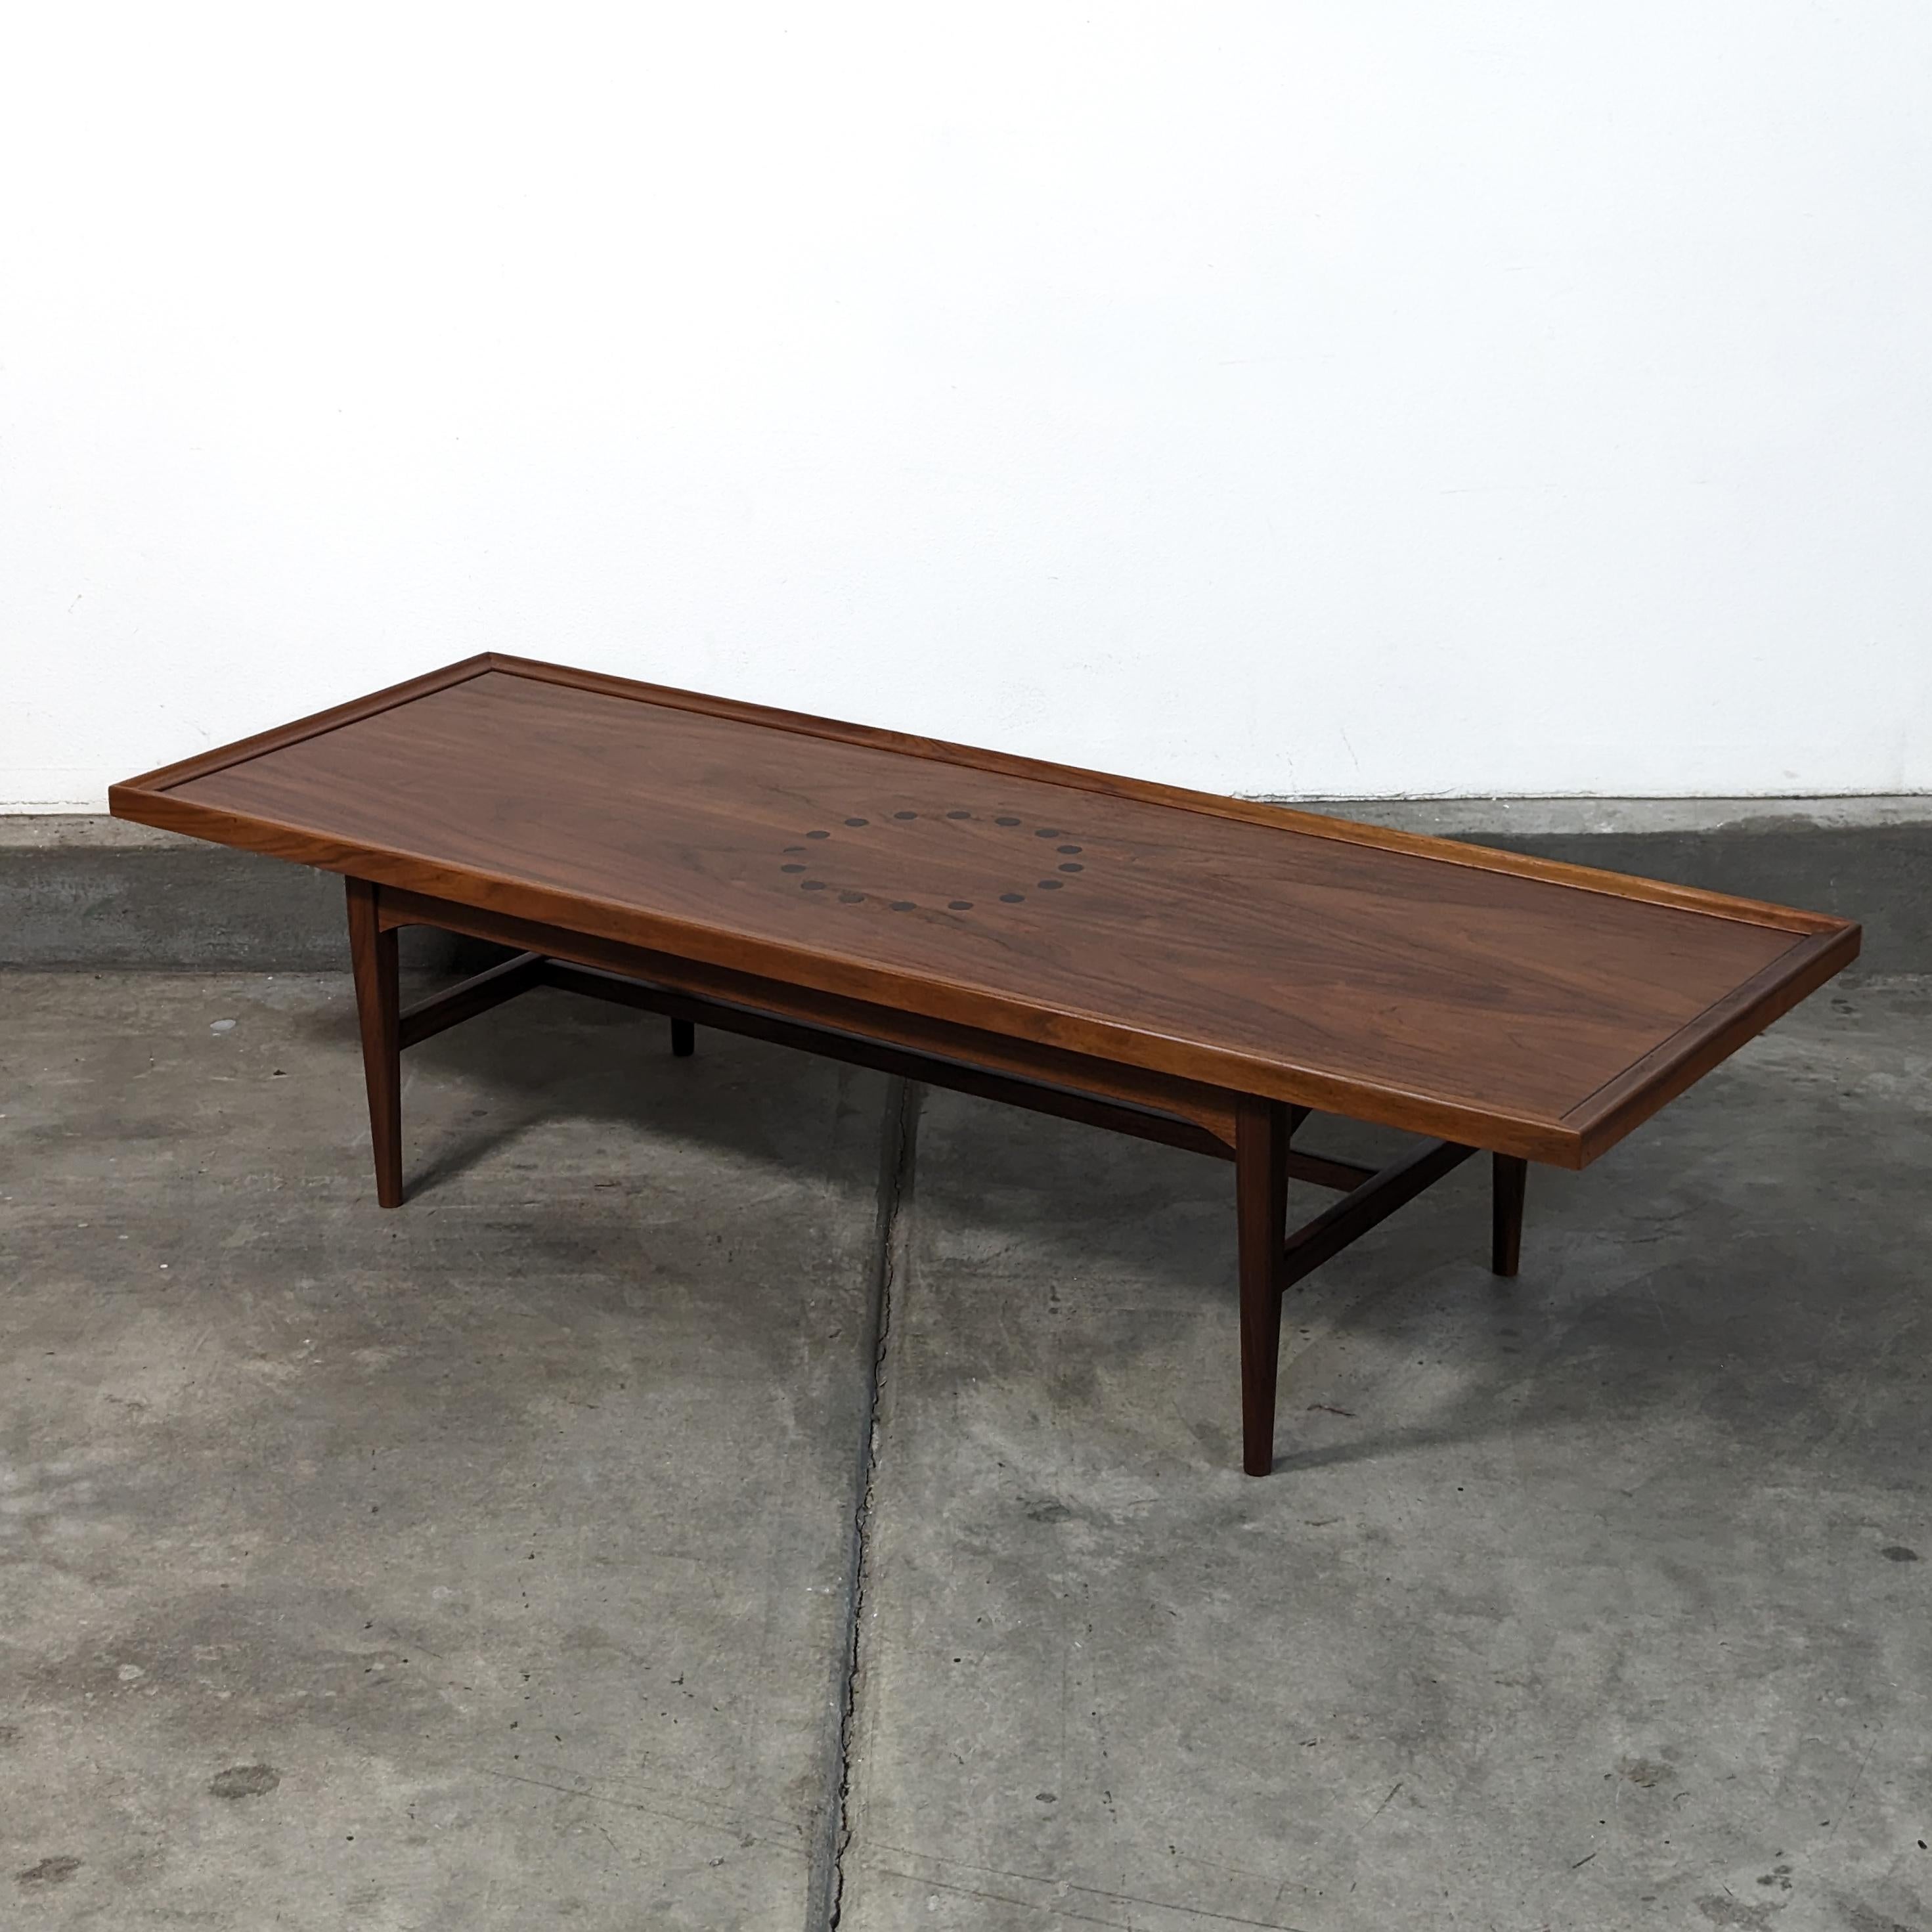 Mid Century Modern Coffee Table By Drexel, Declaration Line, c1960s For Sale 1